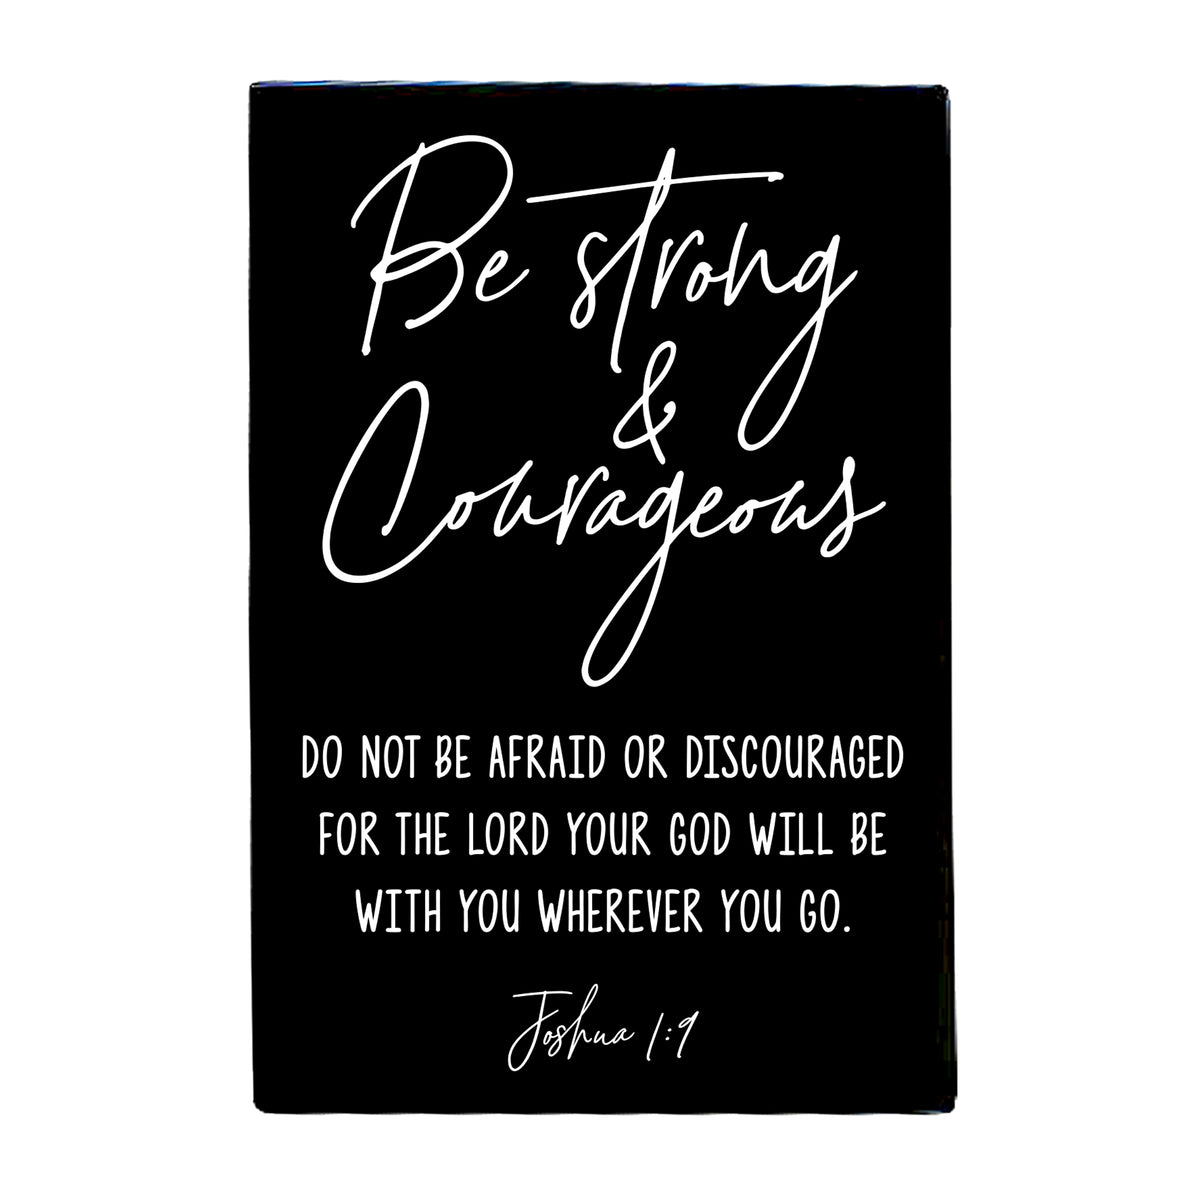 Wood Wall Sign with Inspirational Bible Verse Be Strong &amp; Courageous Table Top Home Office Desk Decoration 5.5x8in